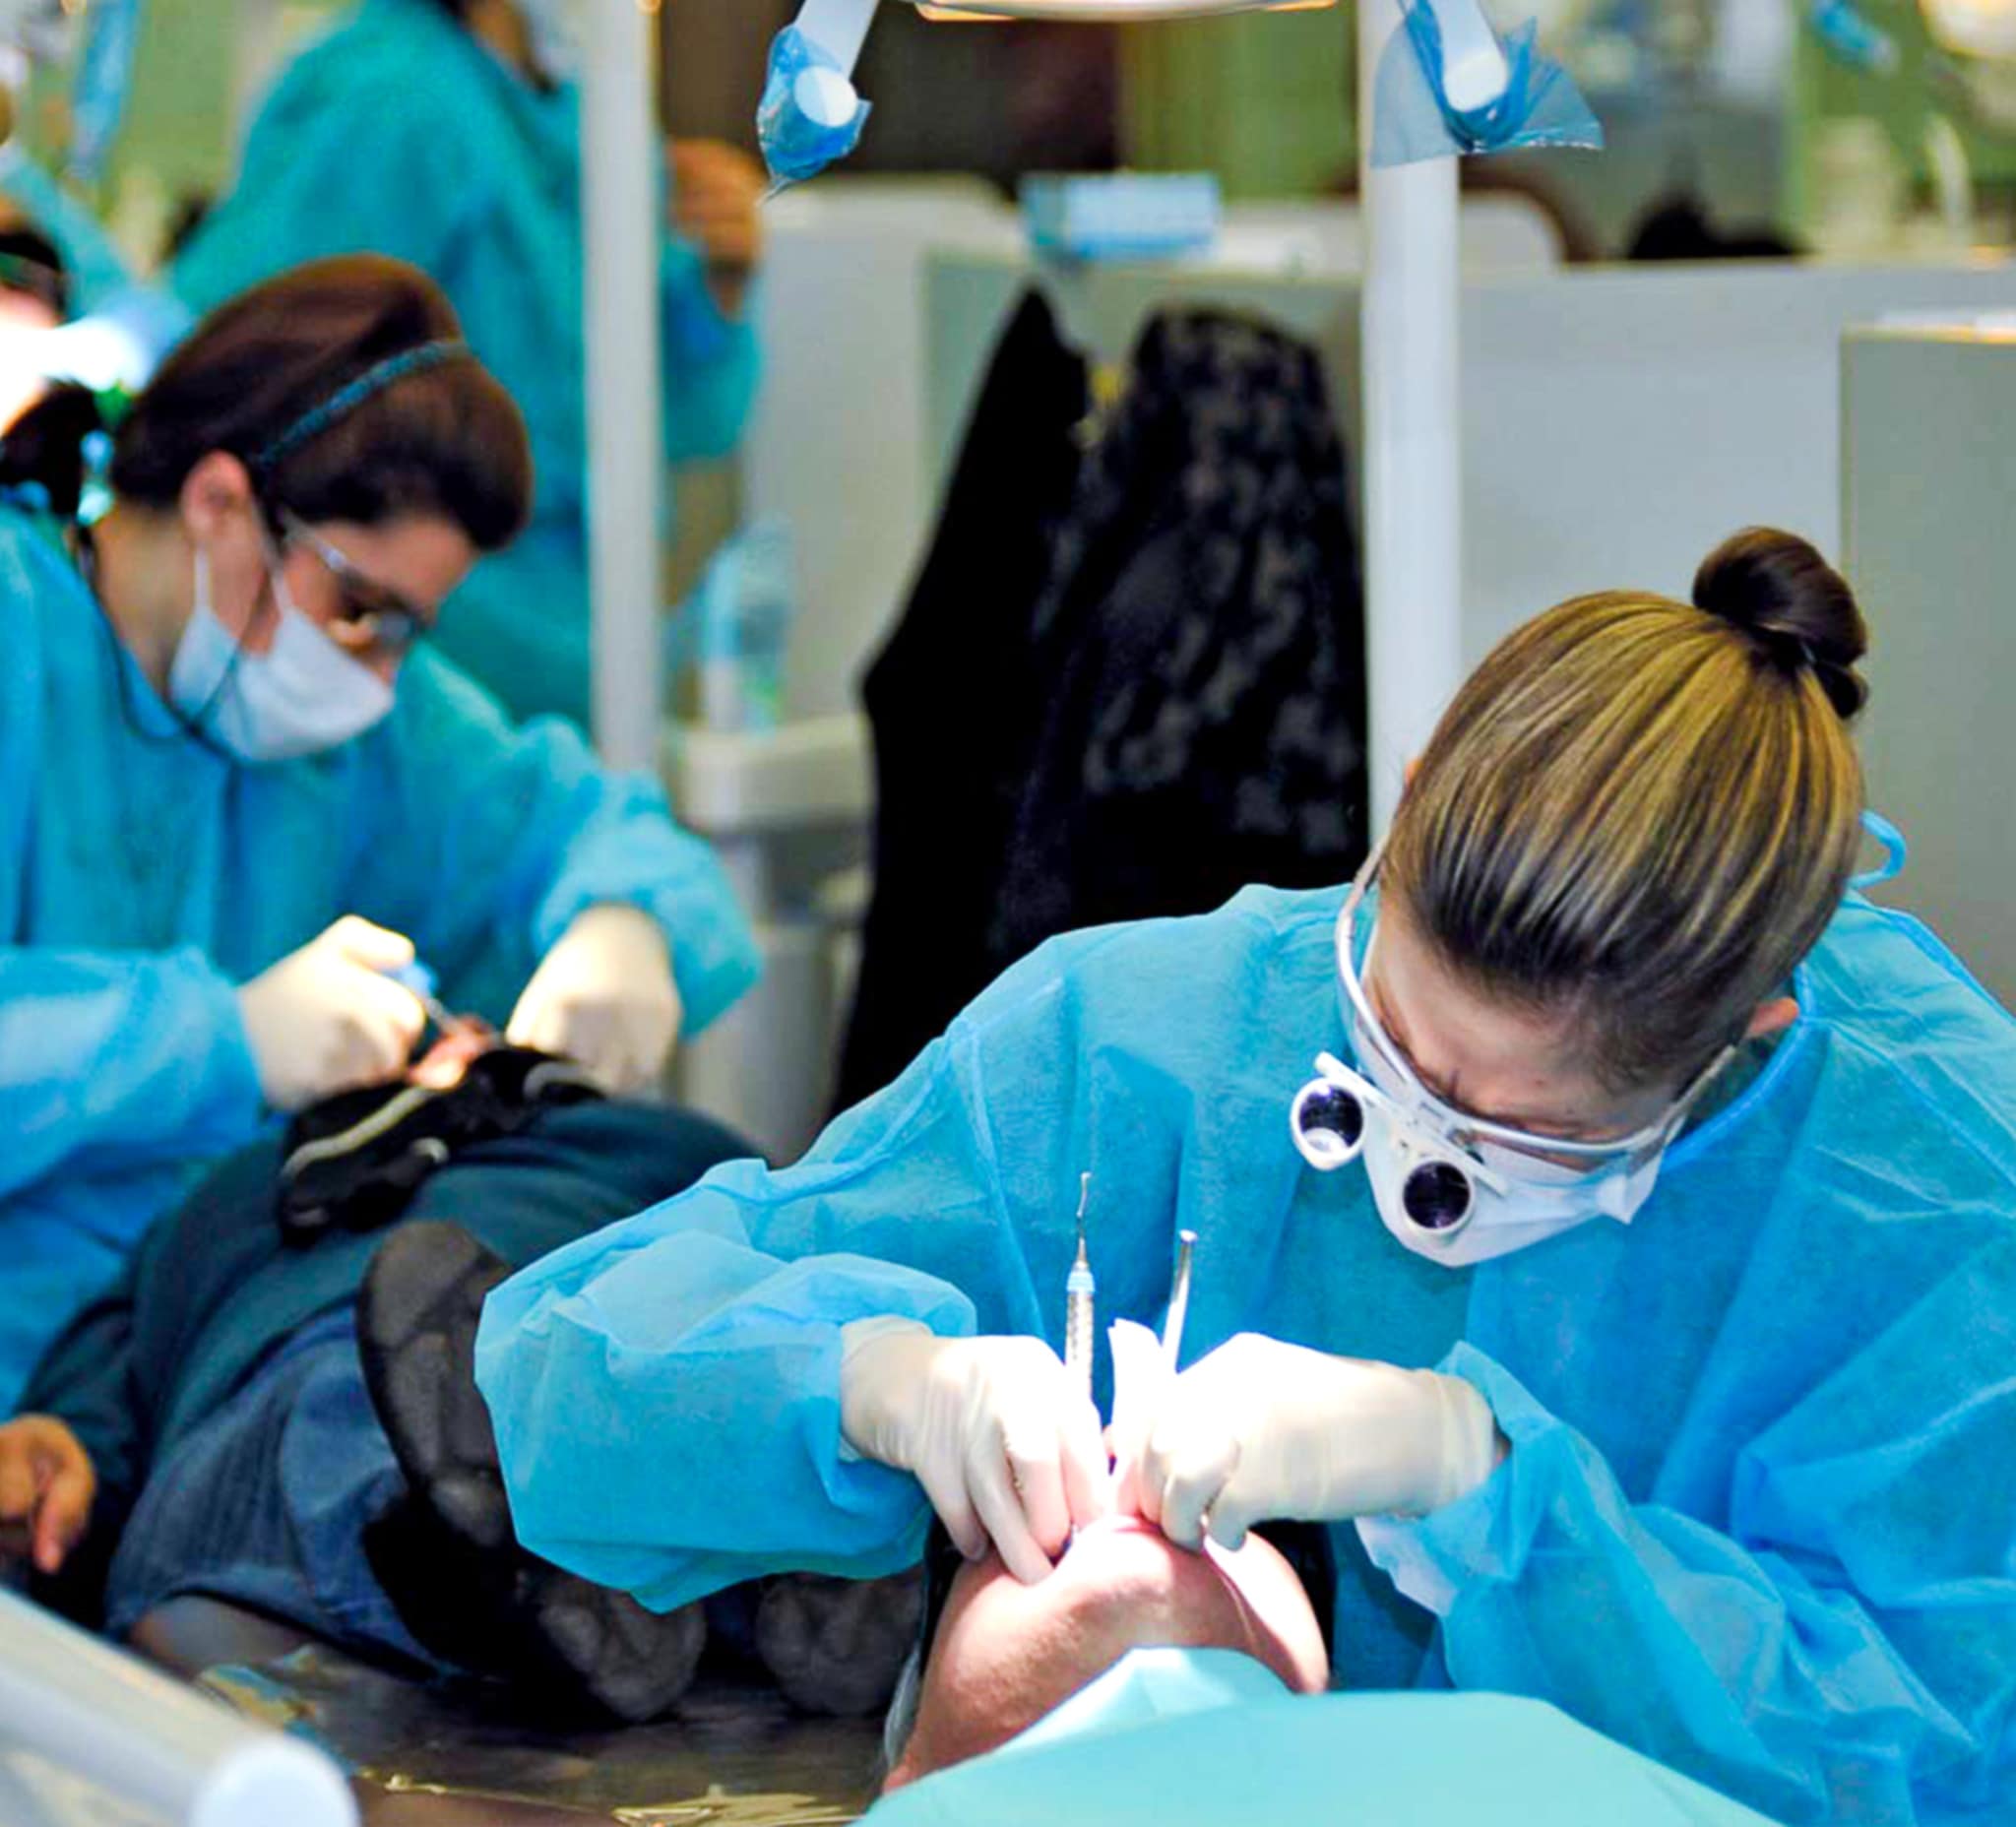 Two women wear goggles, masks, gowns and gloves. They use dentist tools to work on two patients in adjacent cubicles.